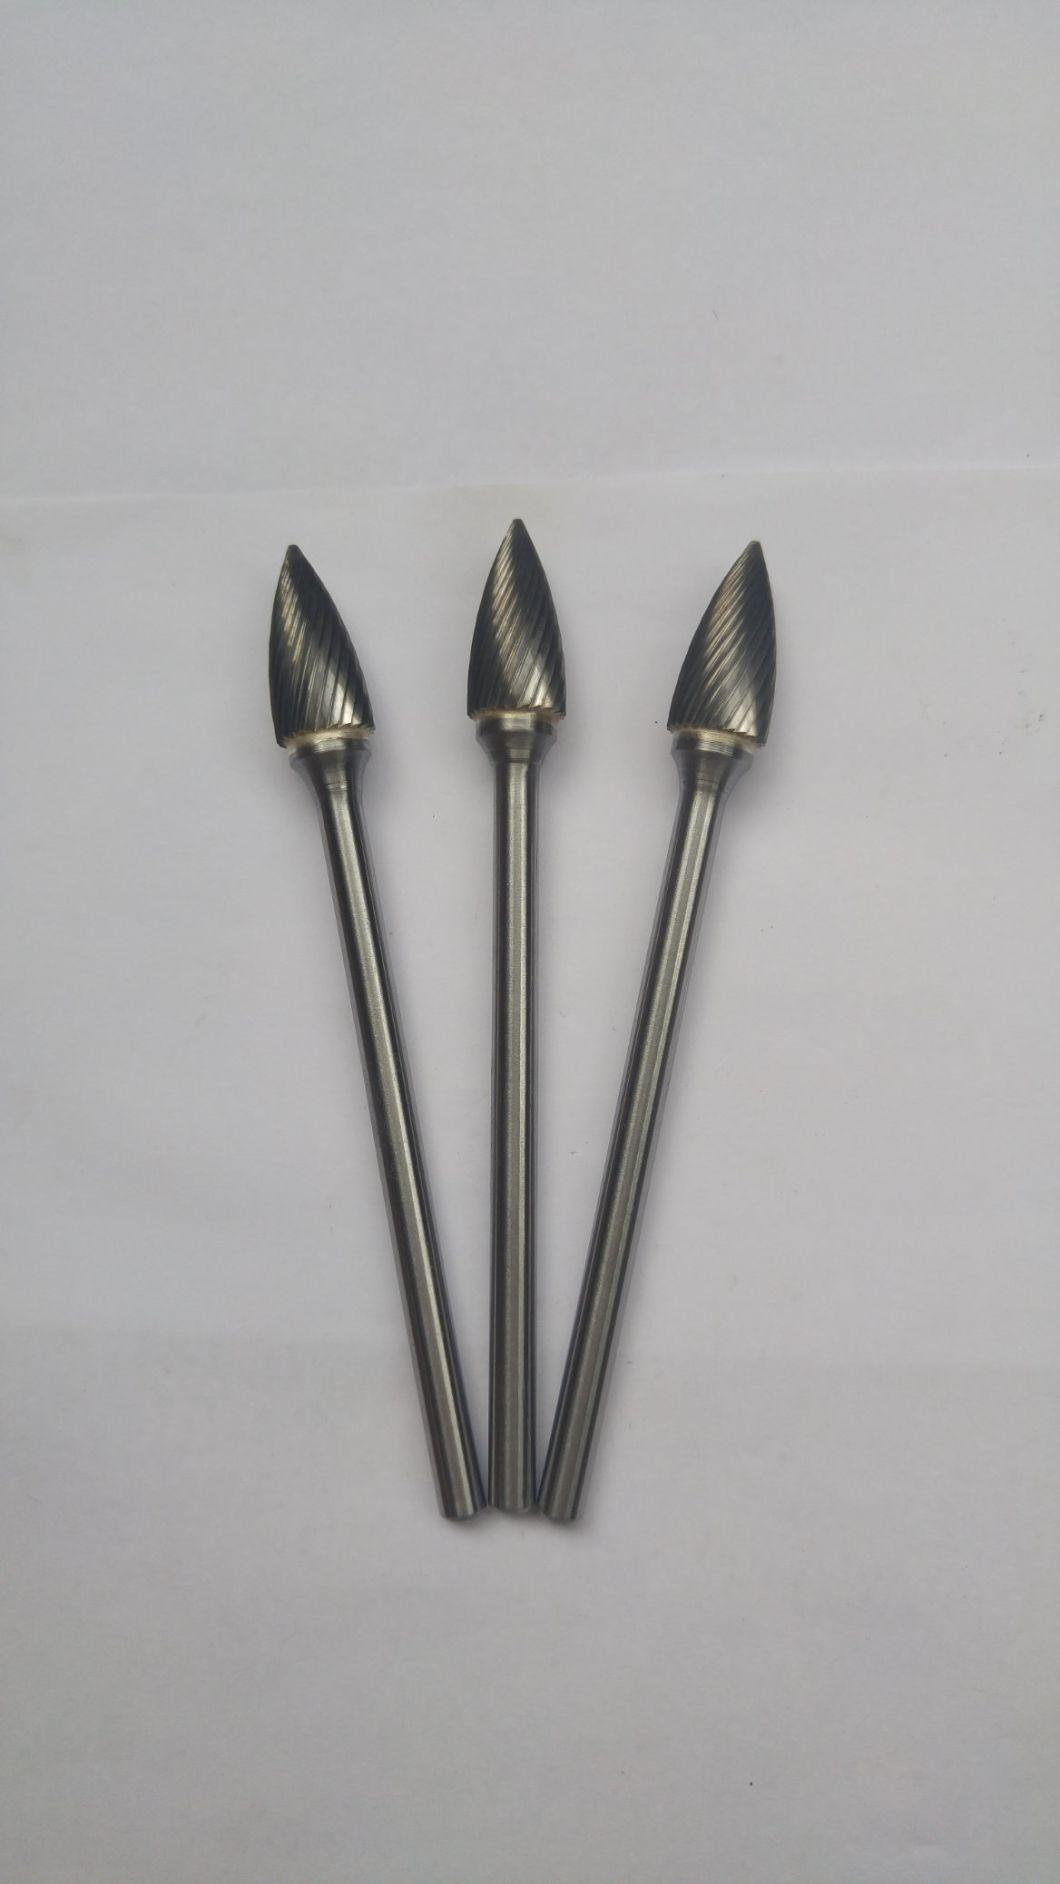 Extensive range of carbide burrs with machine ground cutting flutes